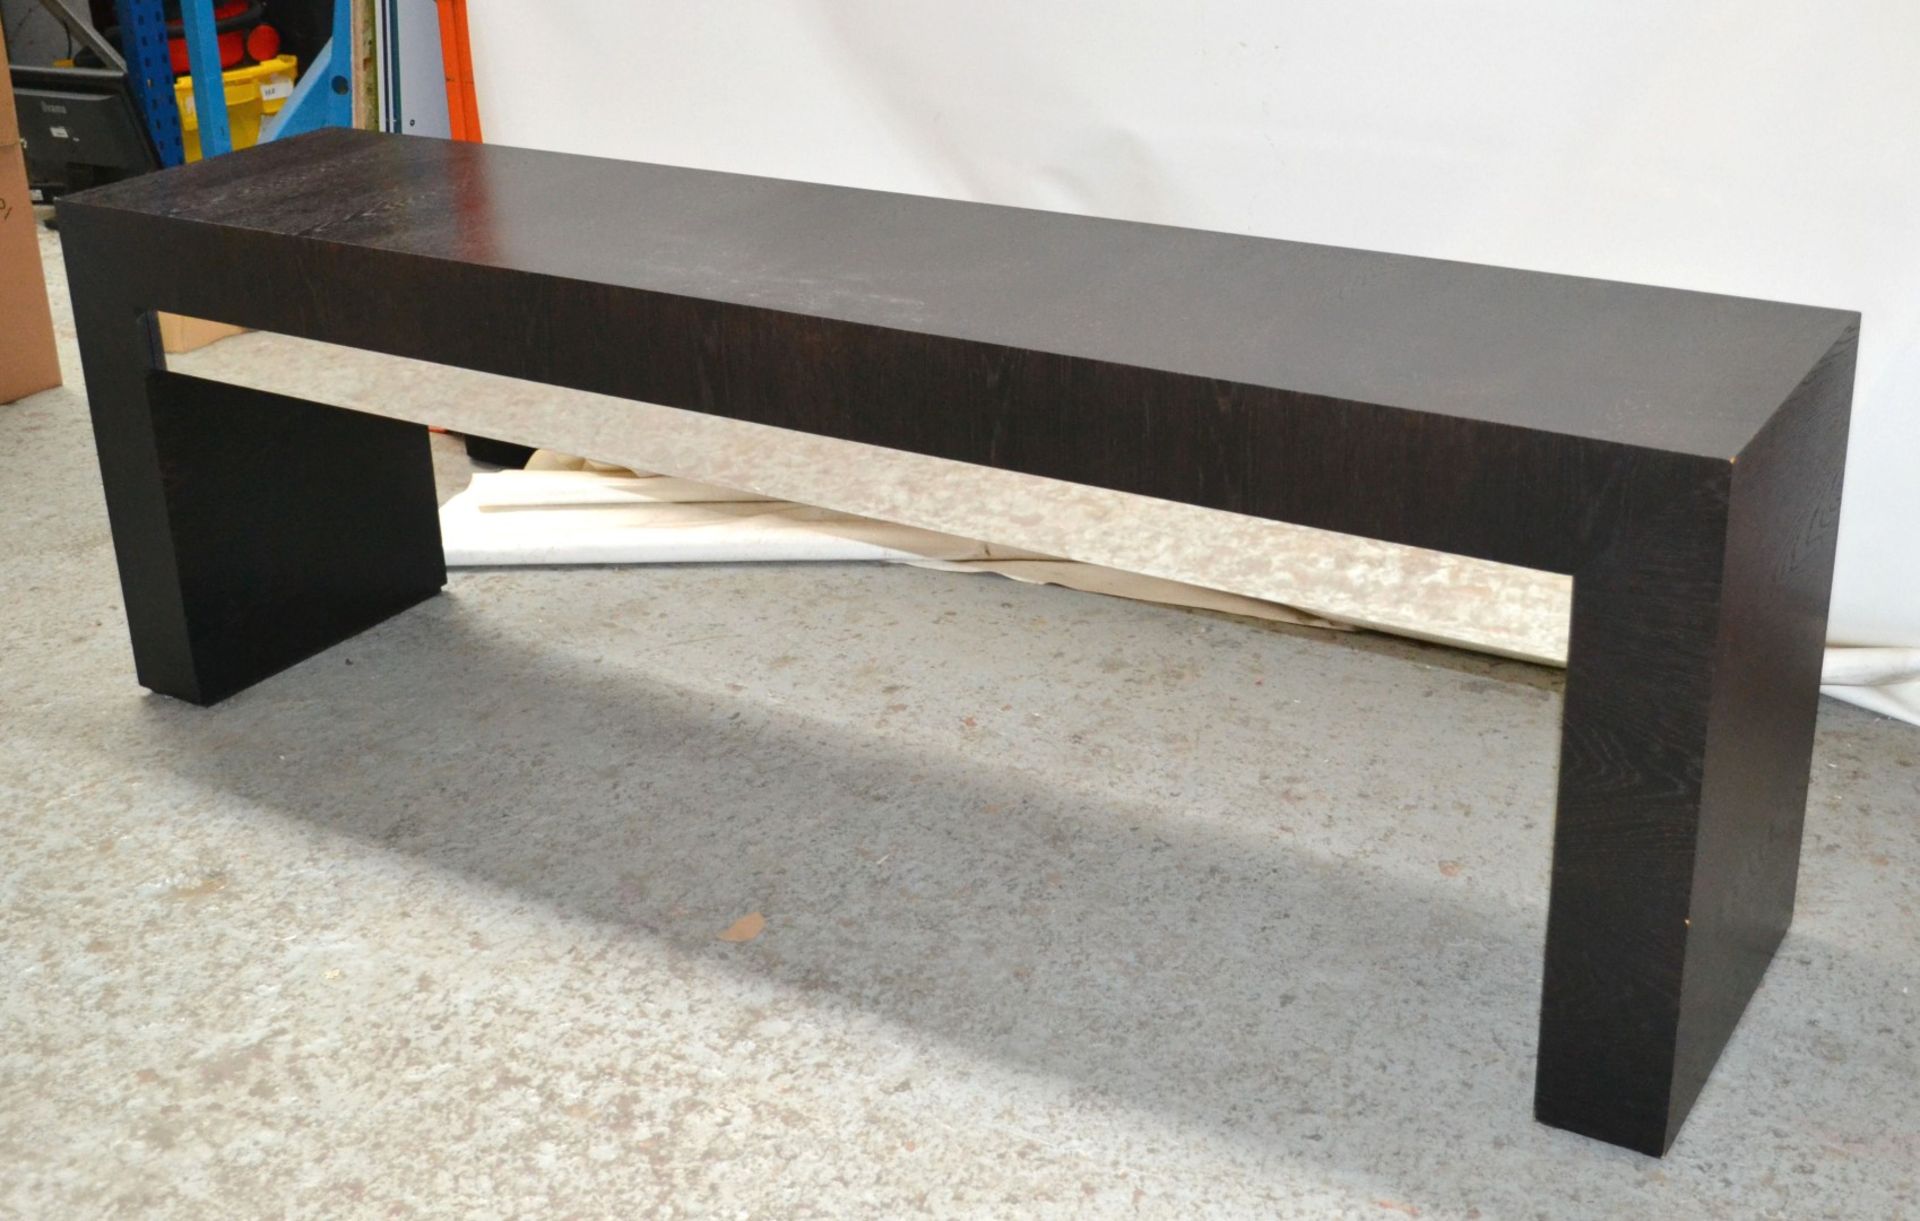 1 x Long Black Serving Table with Cutlery Drawer - CL314 - Location: Altrincham WA14 - *NO VAT On Ha